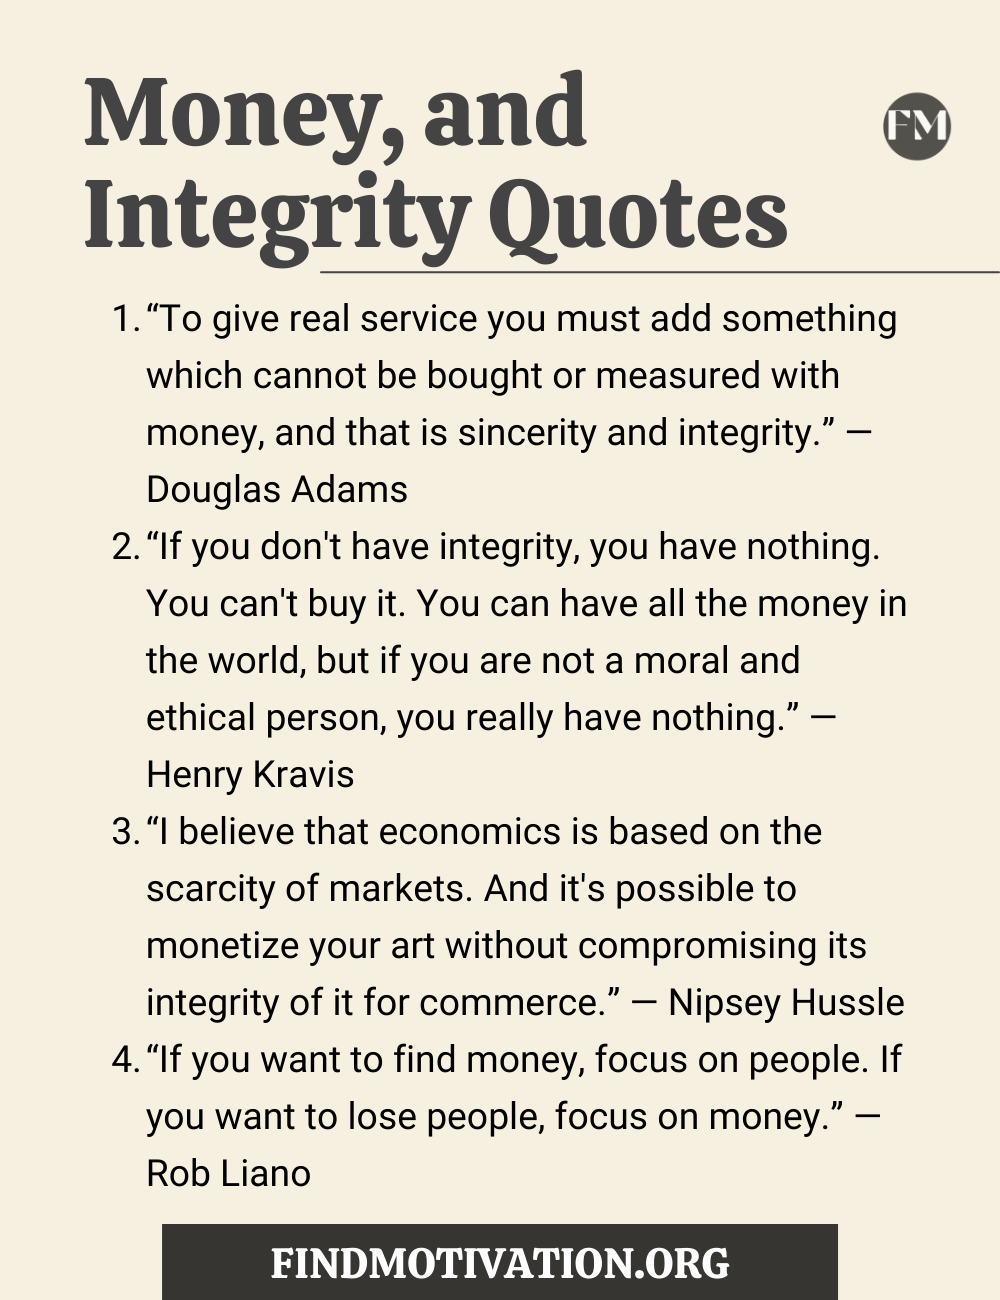 Money, and Integrity Quotes